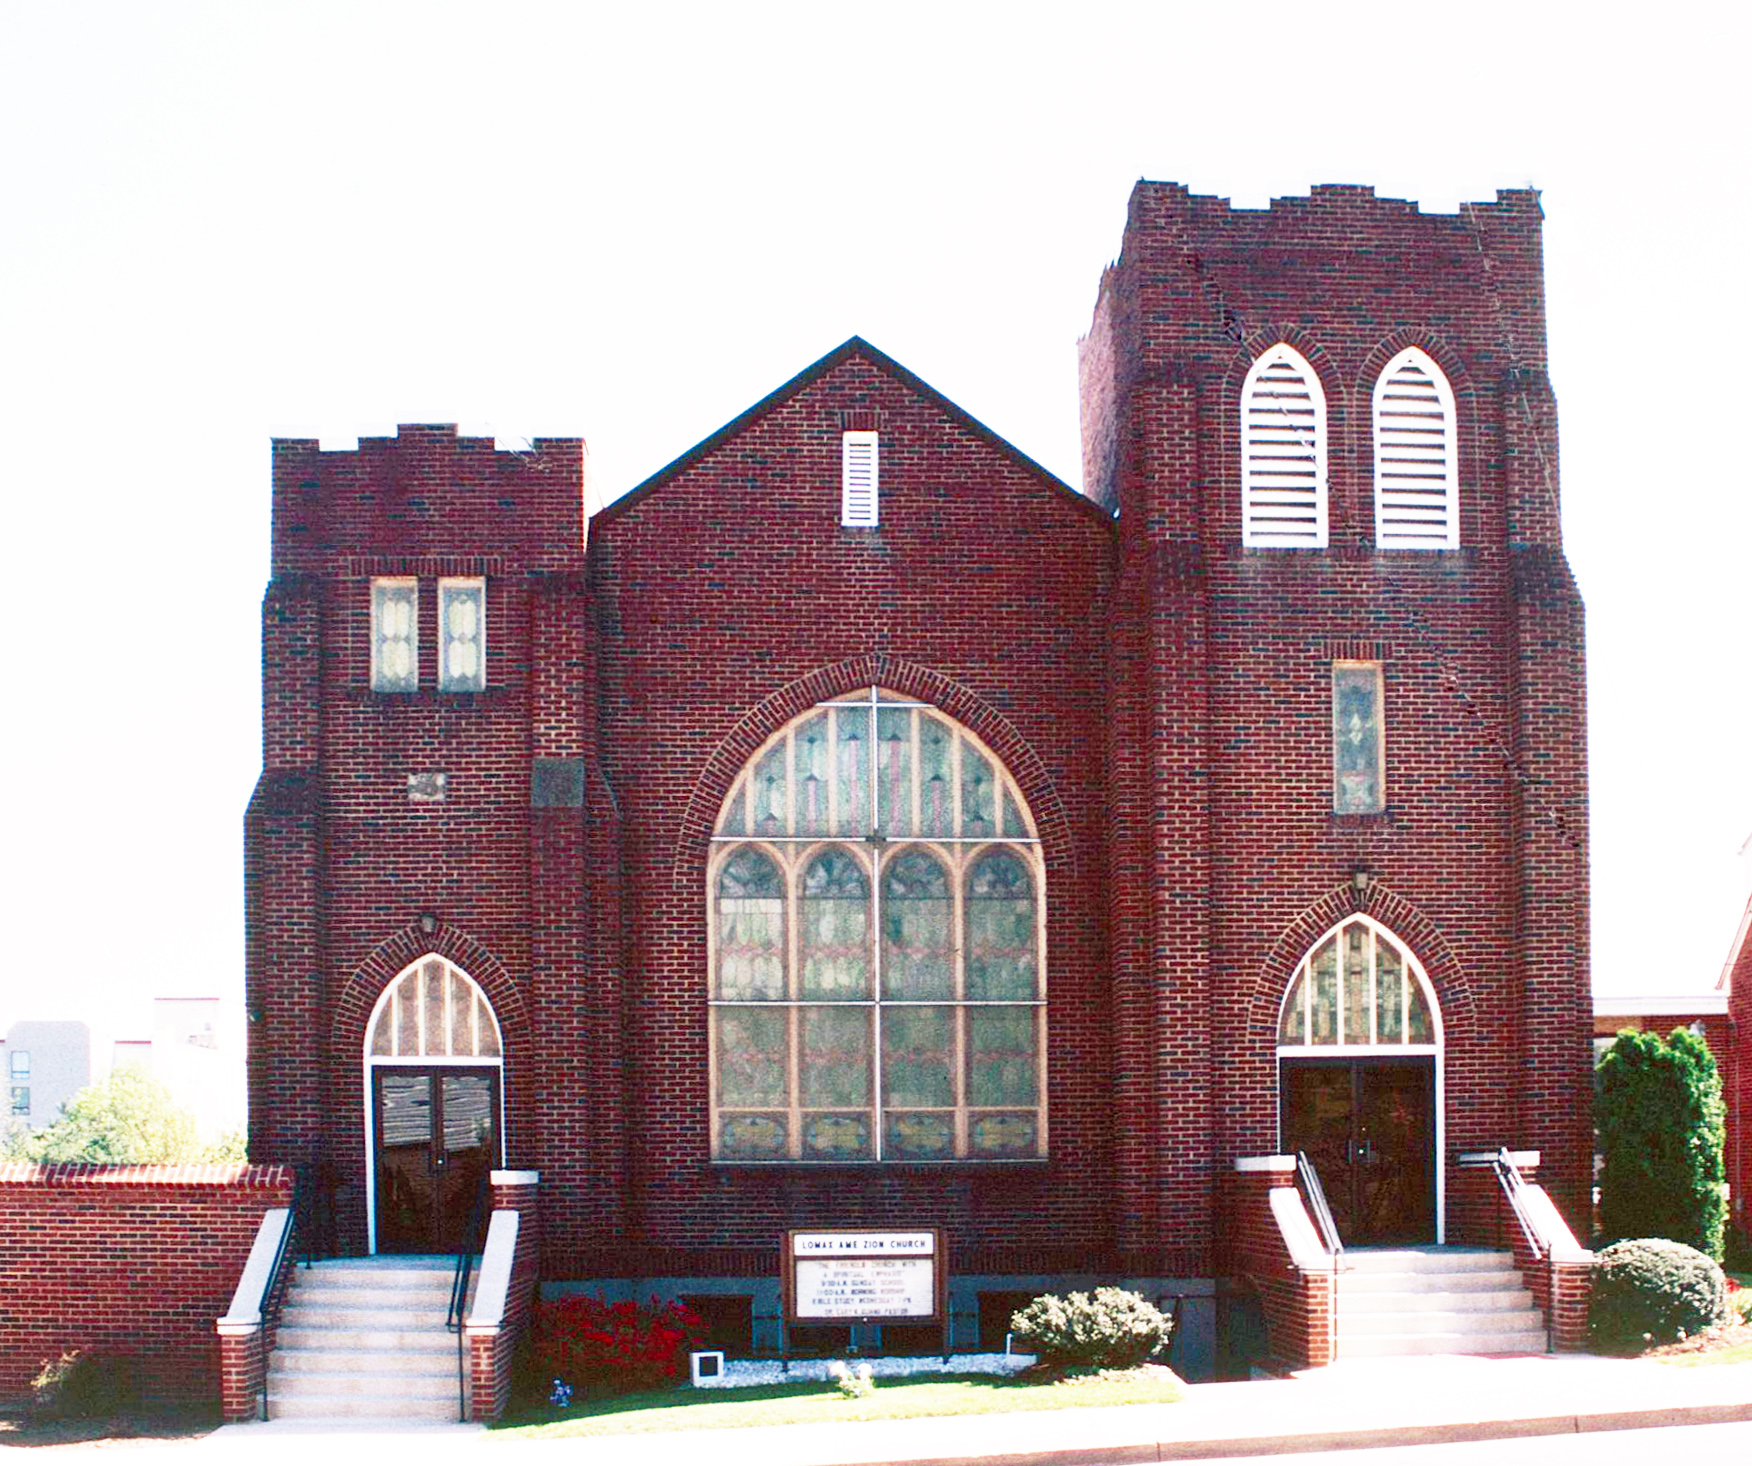 000-1148_Lomax_AME_Church_2004_ext_front_facade_VLR_Online